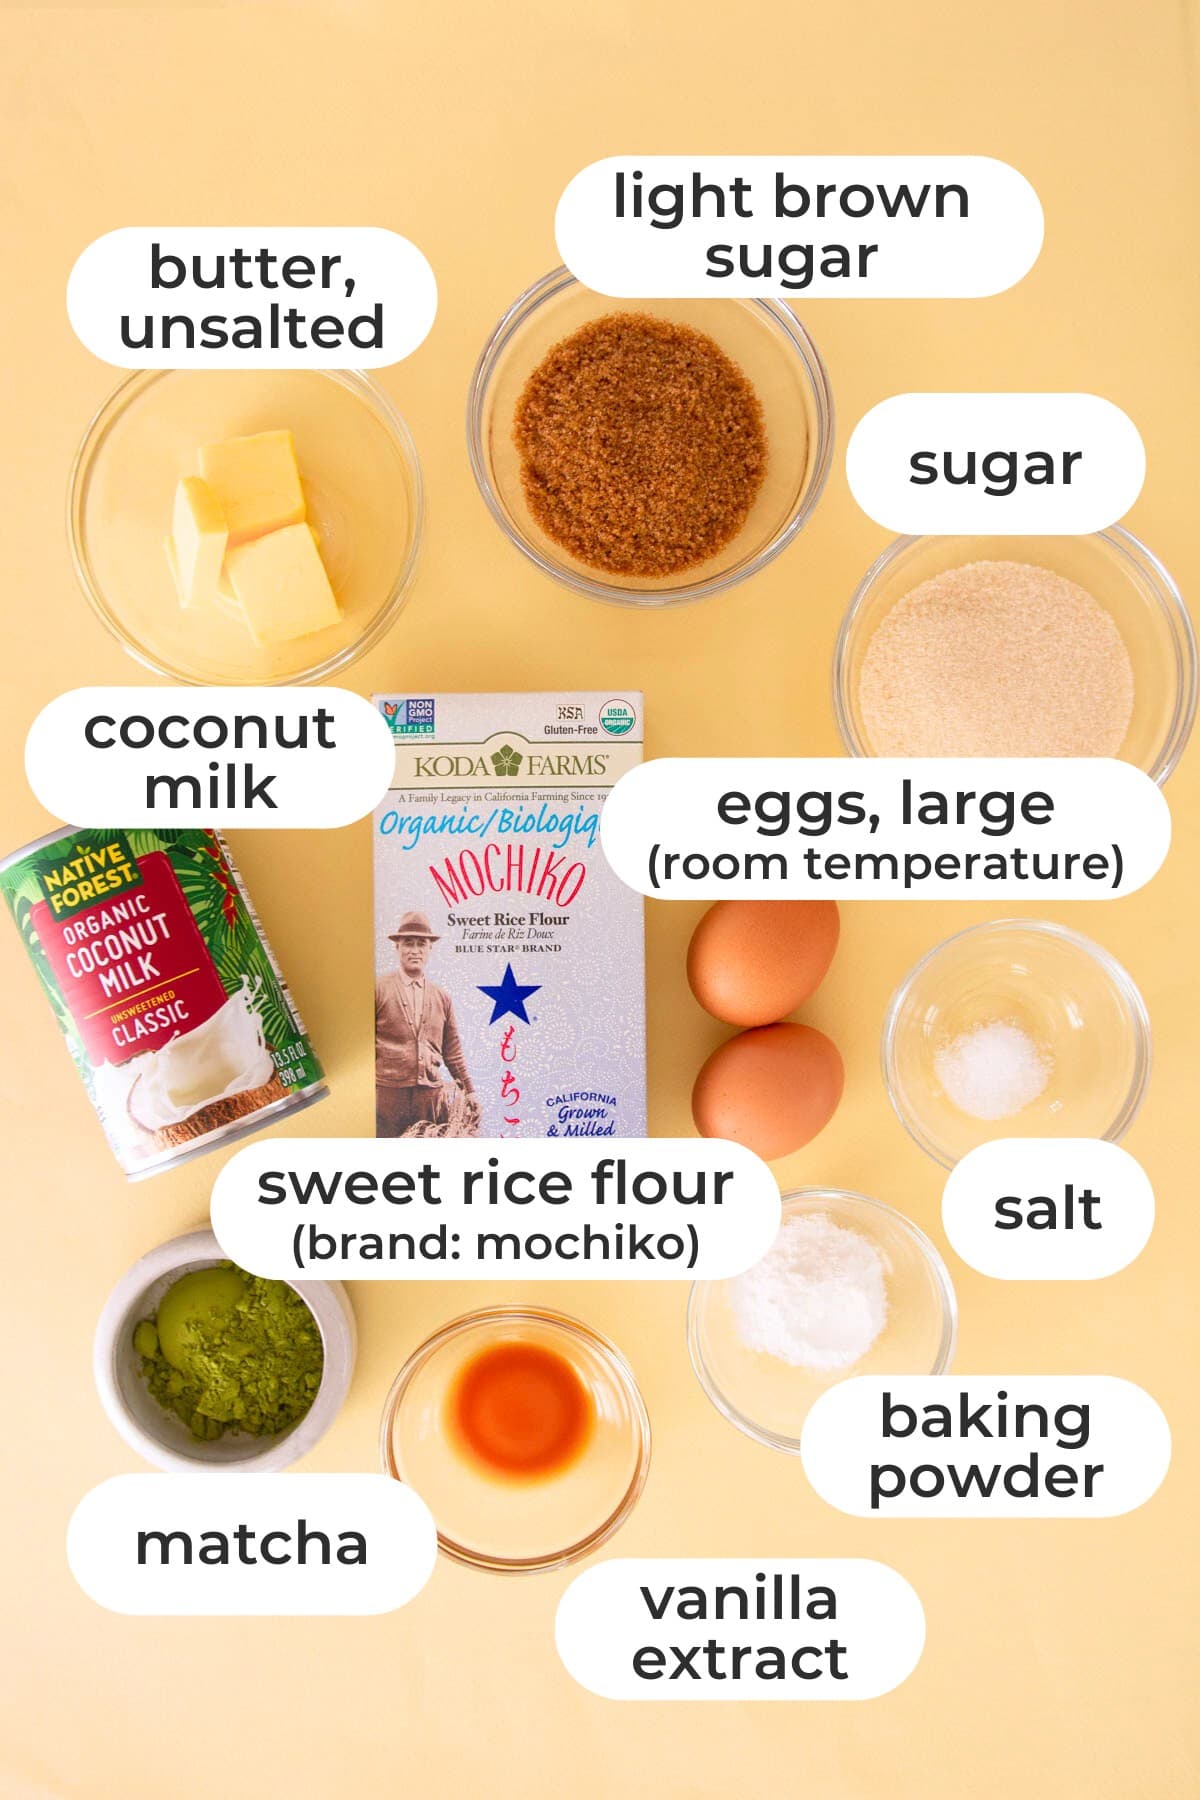 Labeled ingredients for matcha mochi muffins over a yellow background, including unsalted butter, light brown sugar, sugar, coconut milk, eggs (room temperature), sweet rice flour (brand: mochiko), salt, matcha, vanilla extract, and baking powder.